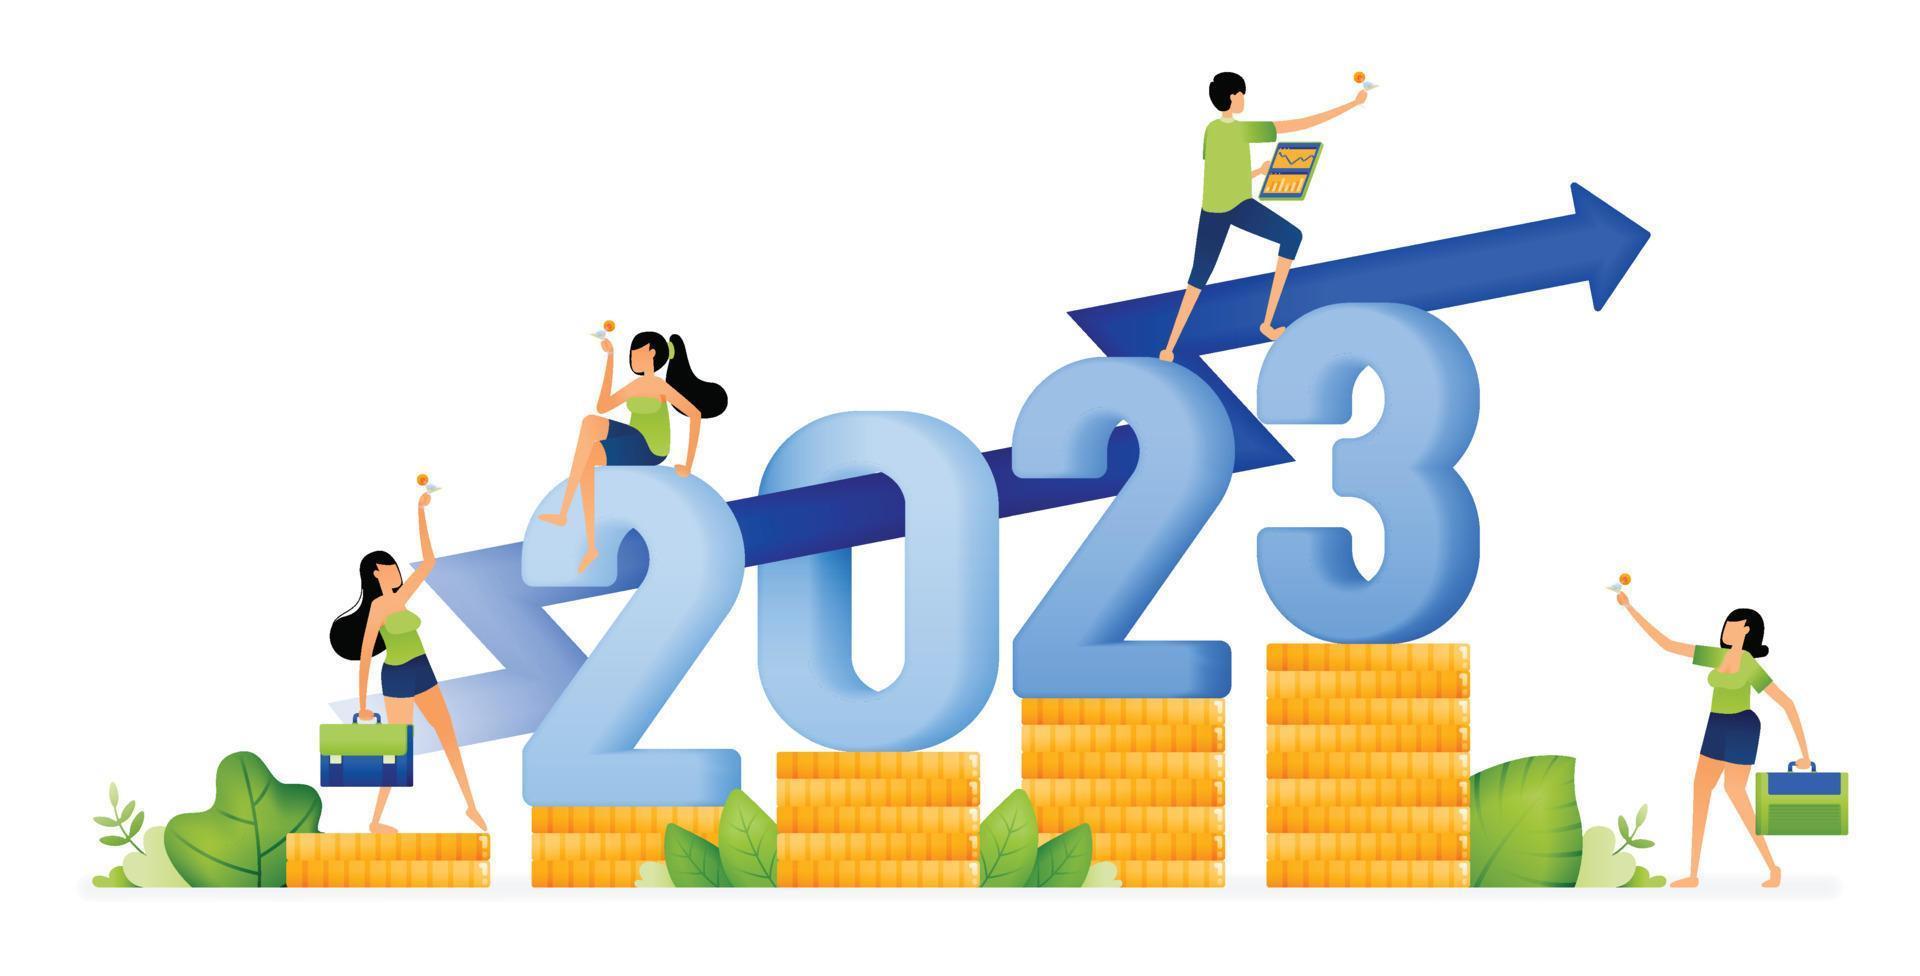 Illustration of people celebrating the new year 2022 to 2023 with the hope of achieving goals of investment. Designed for website, landing page, flyer, banner, apps, brochure, startup media company vector